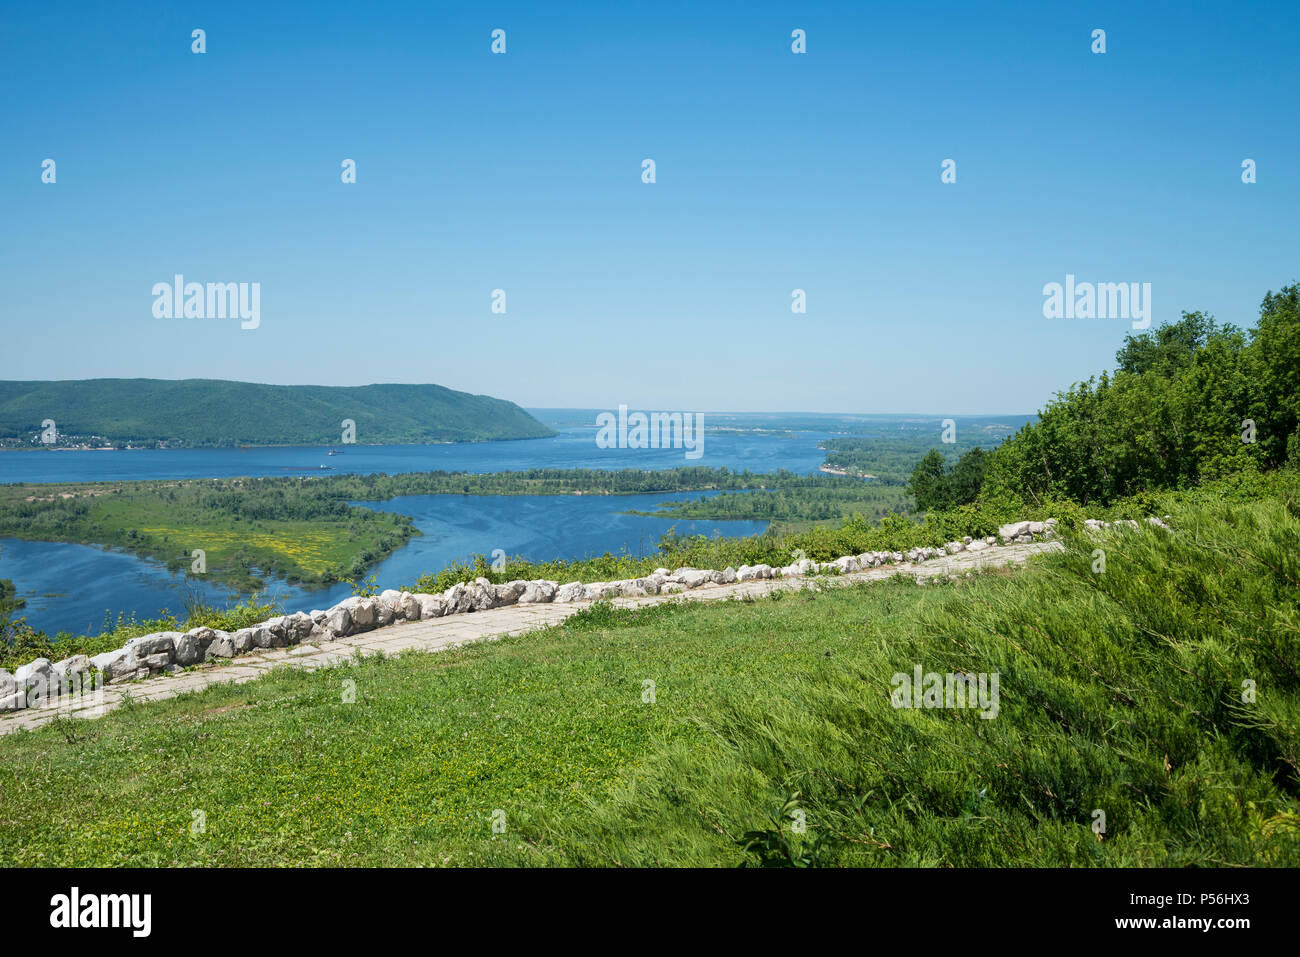 Panoramic view of the river Volga from a helicopter platform the city of Samara Russia. Stock Photo